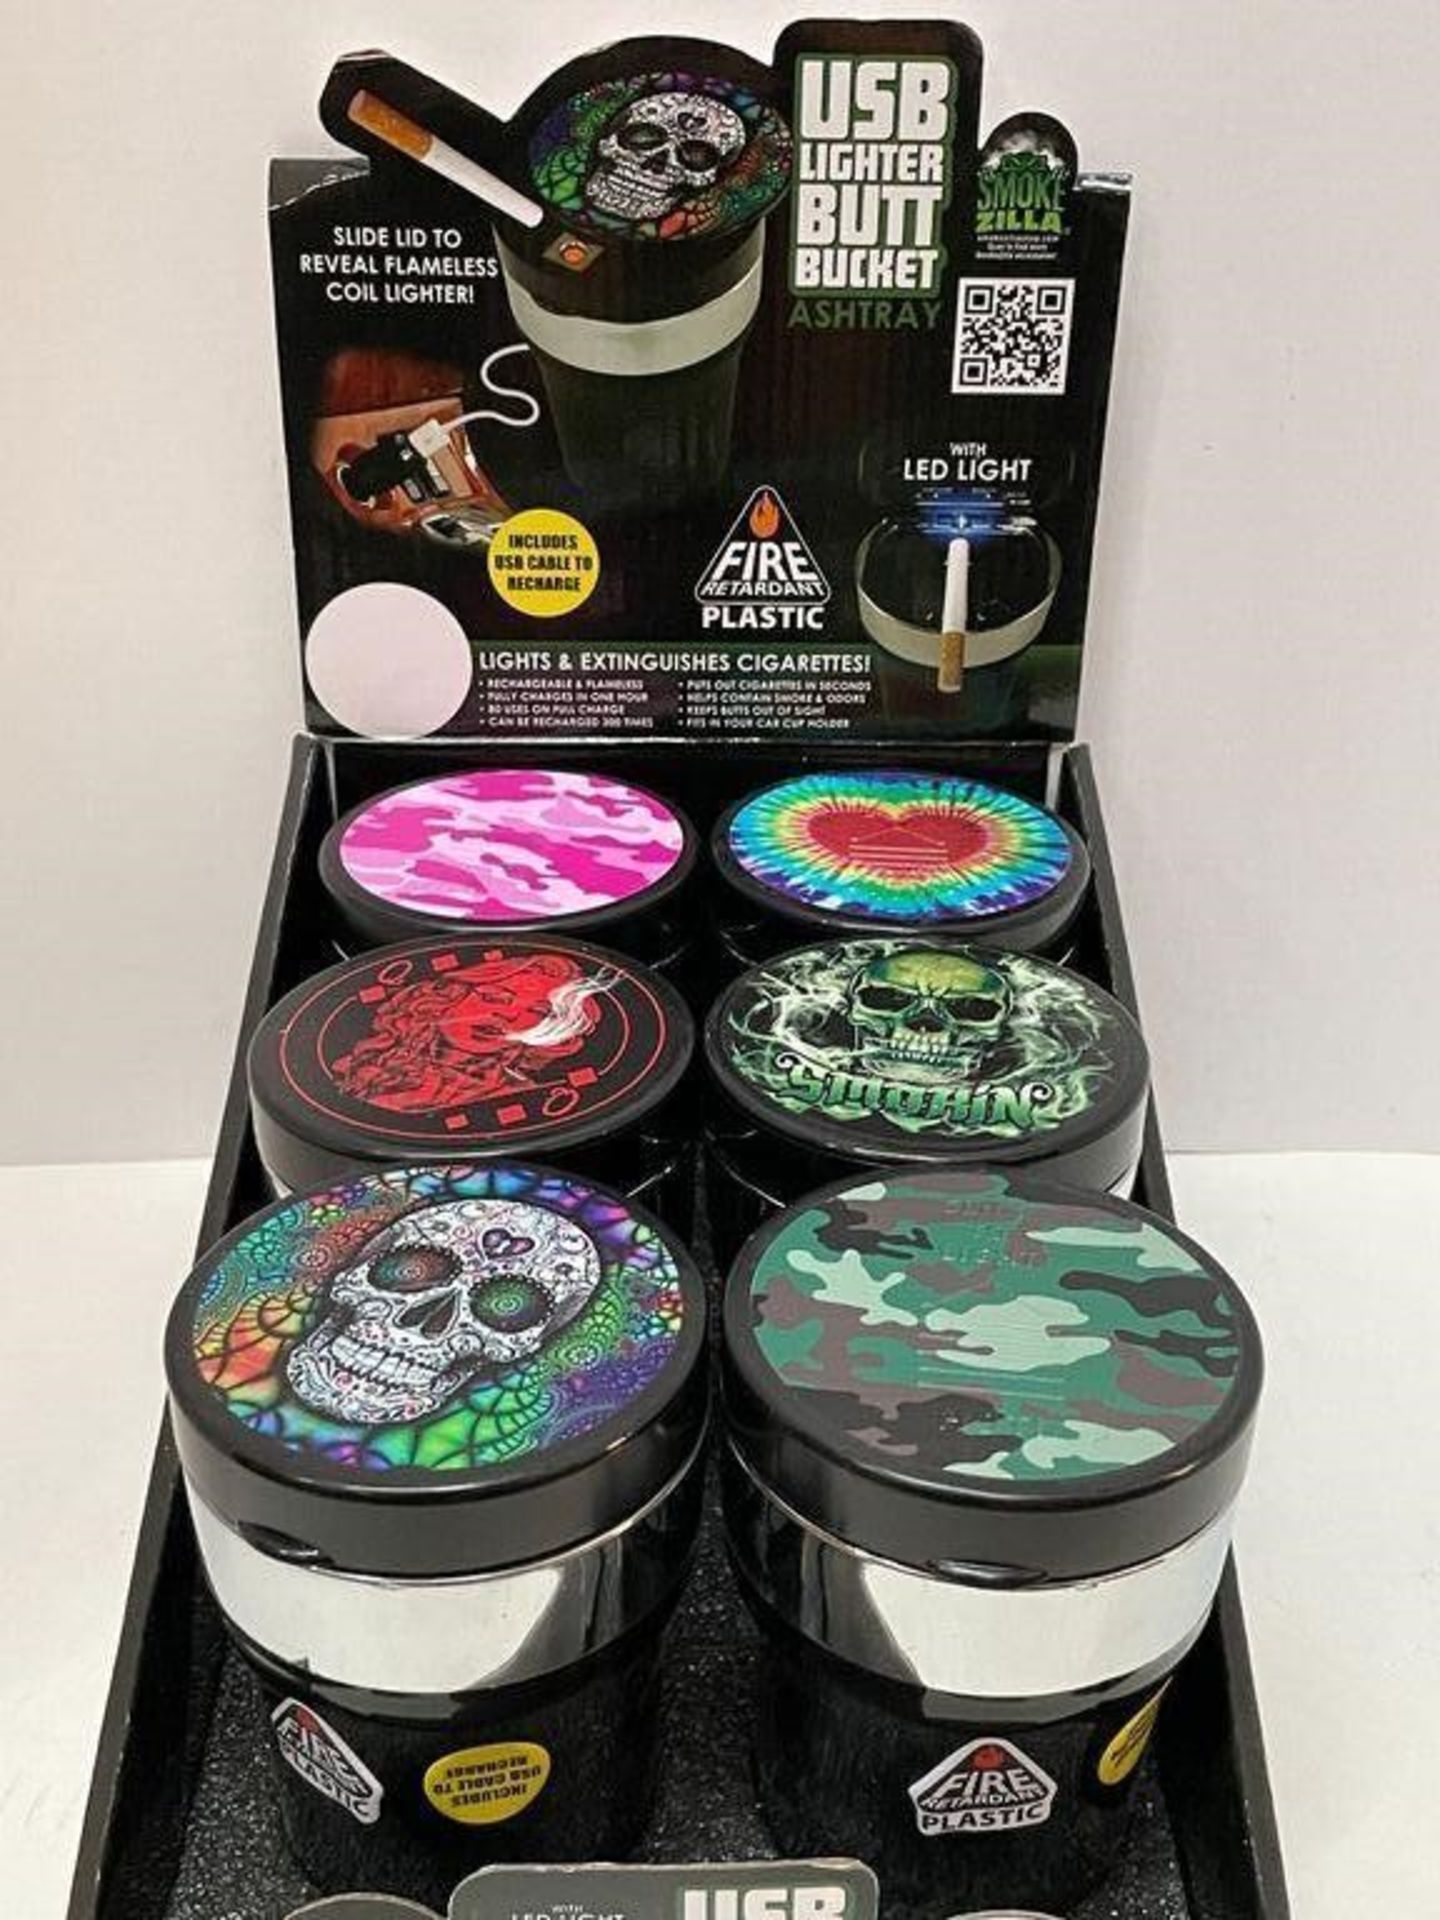 6 X USB LIGHTER BUTT BUCKET ASHTRAYS WITH LED LIGHTS IN DISPLAY CASE - Image 3 of 4